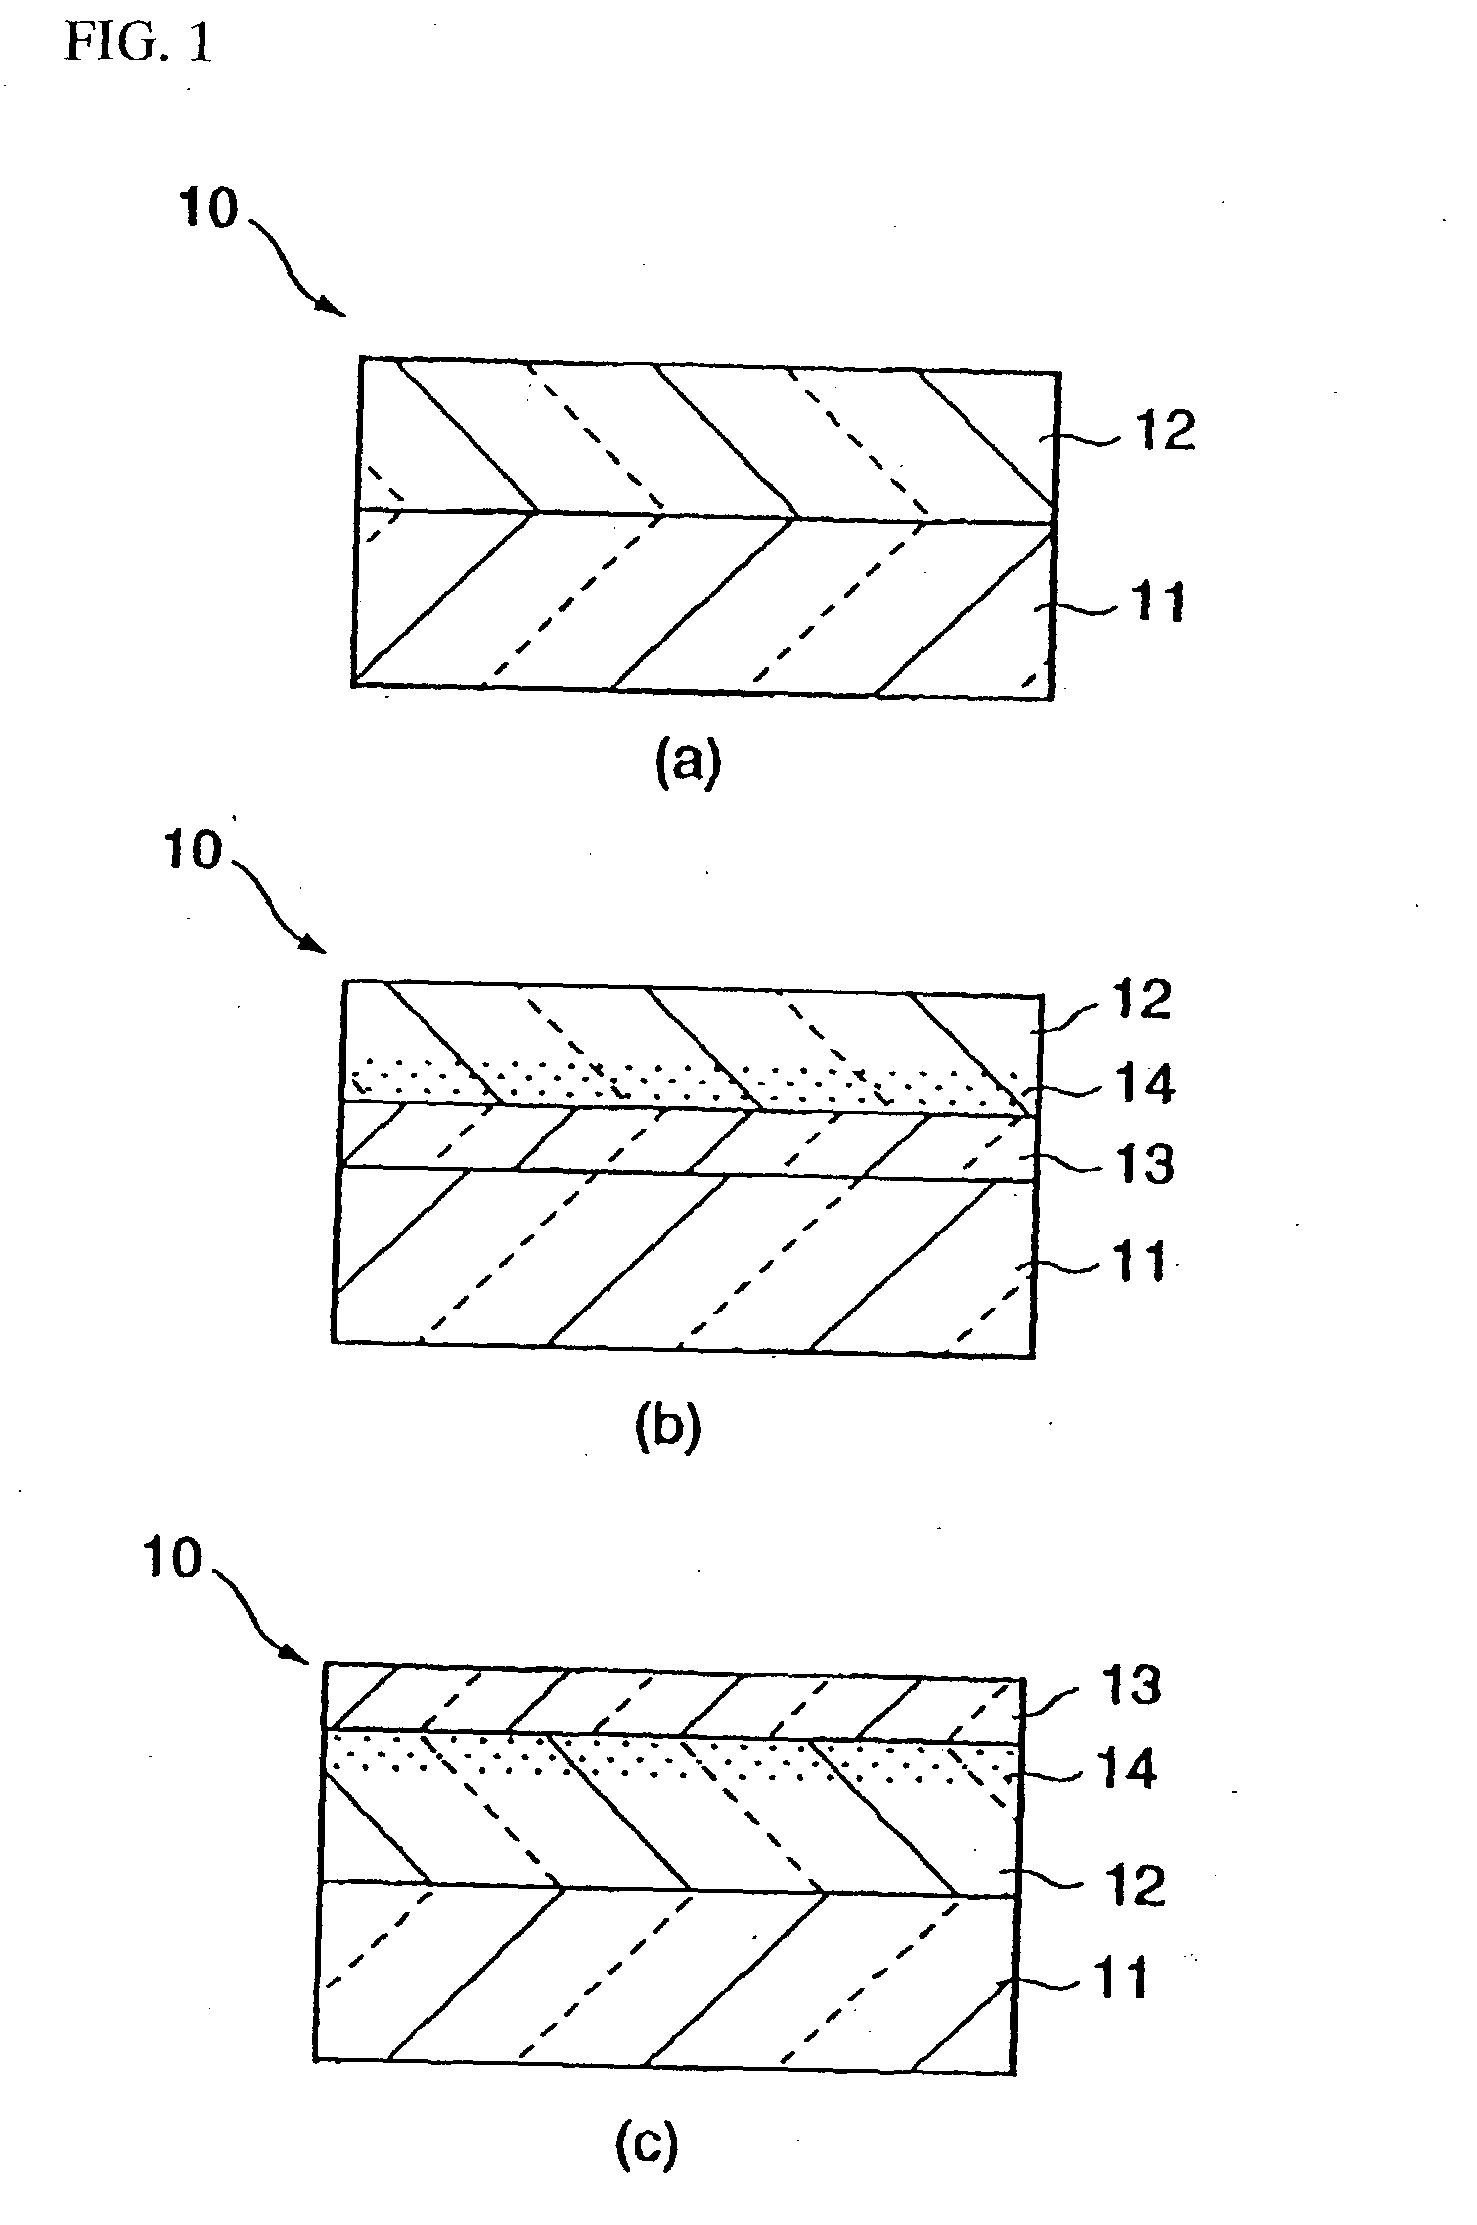 Article coated with photocatalyst film, method for preparing the article and sputtering target for use in coating with the film